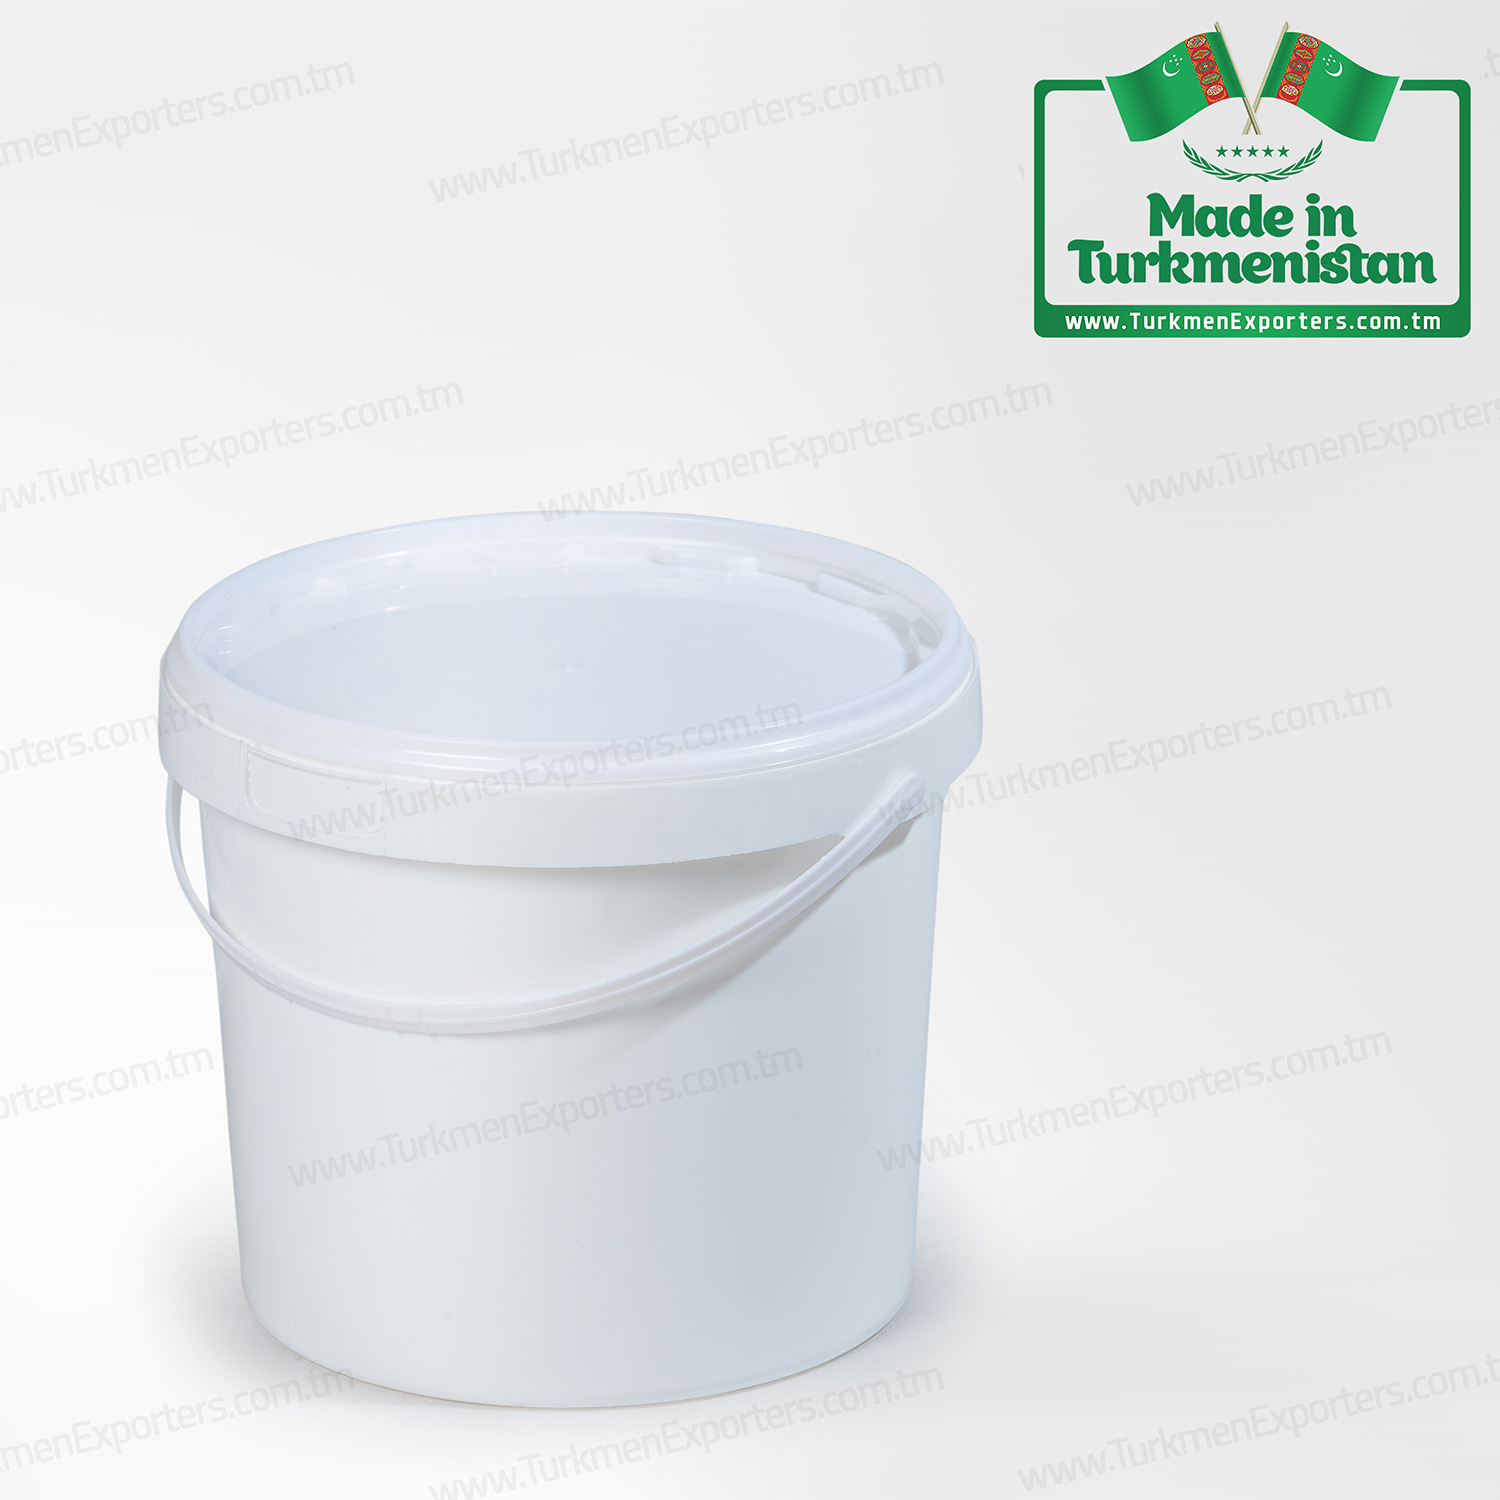 Plastic bucket for food products Made in Turkmenistan | Turkmen Shohle economic society